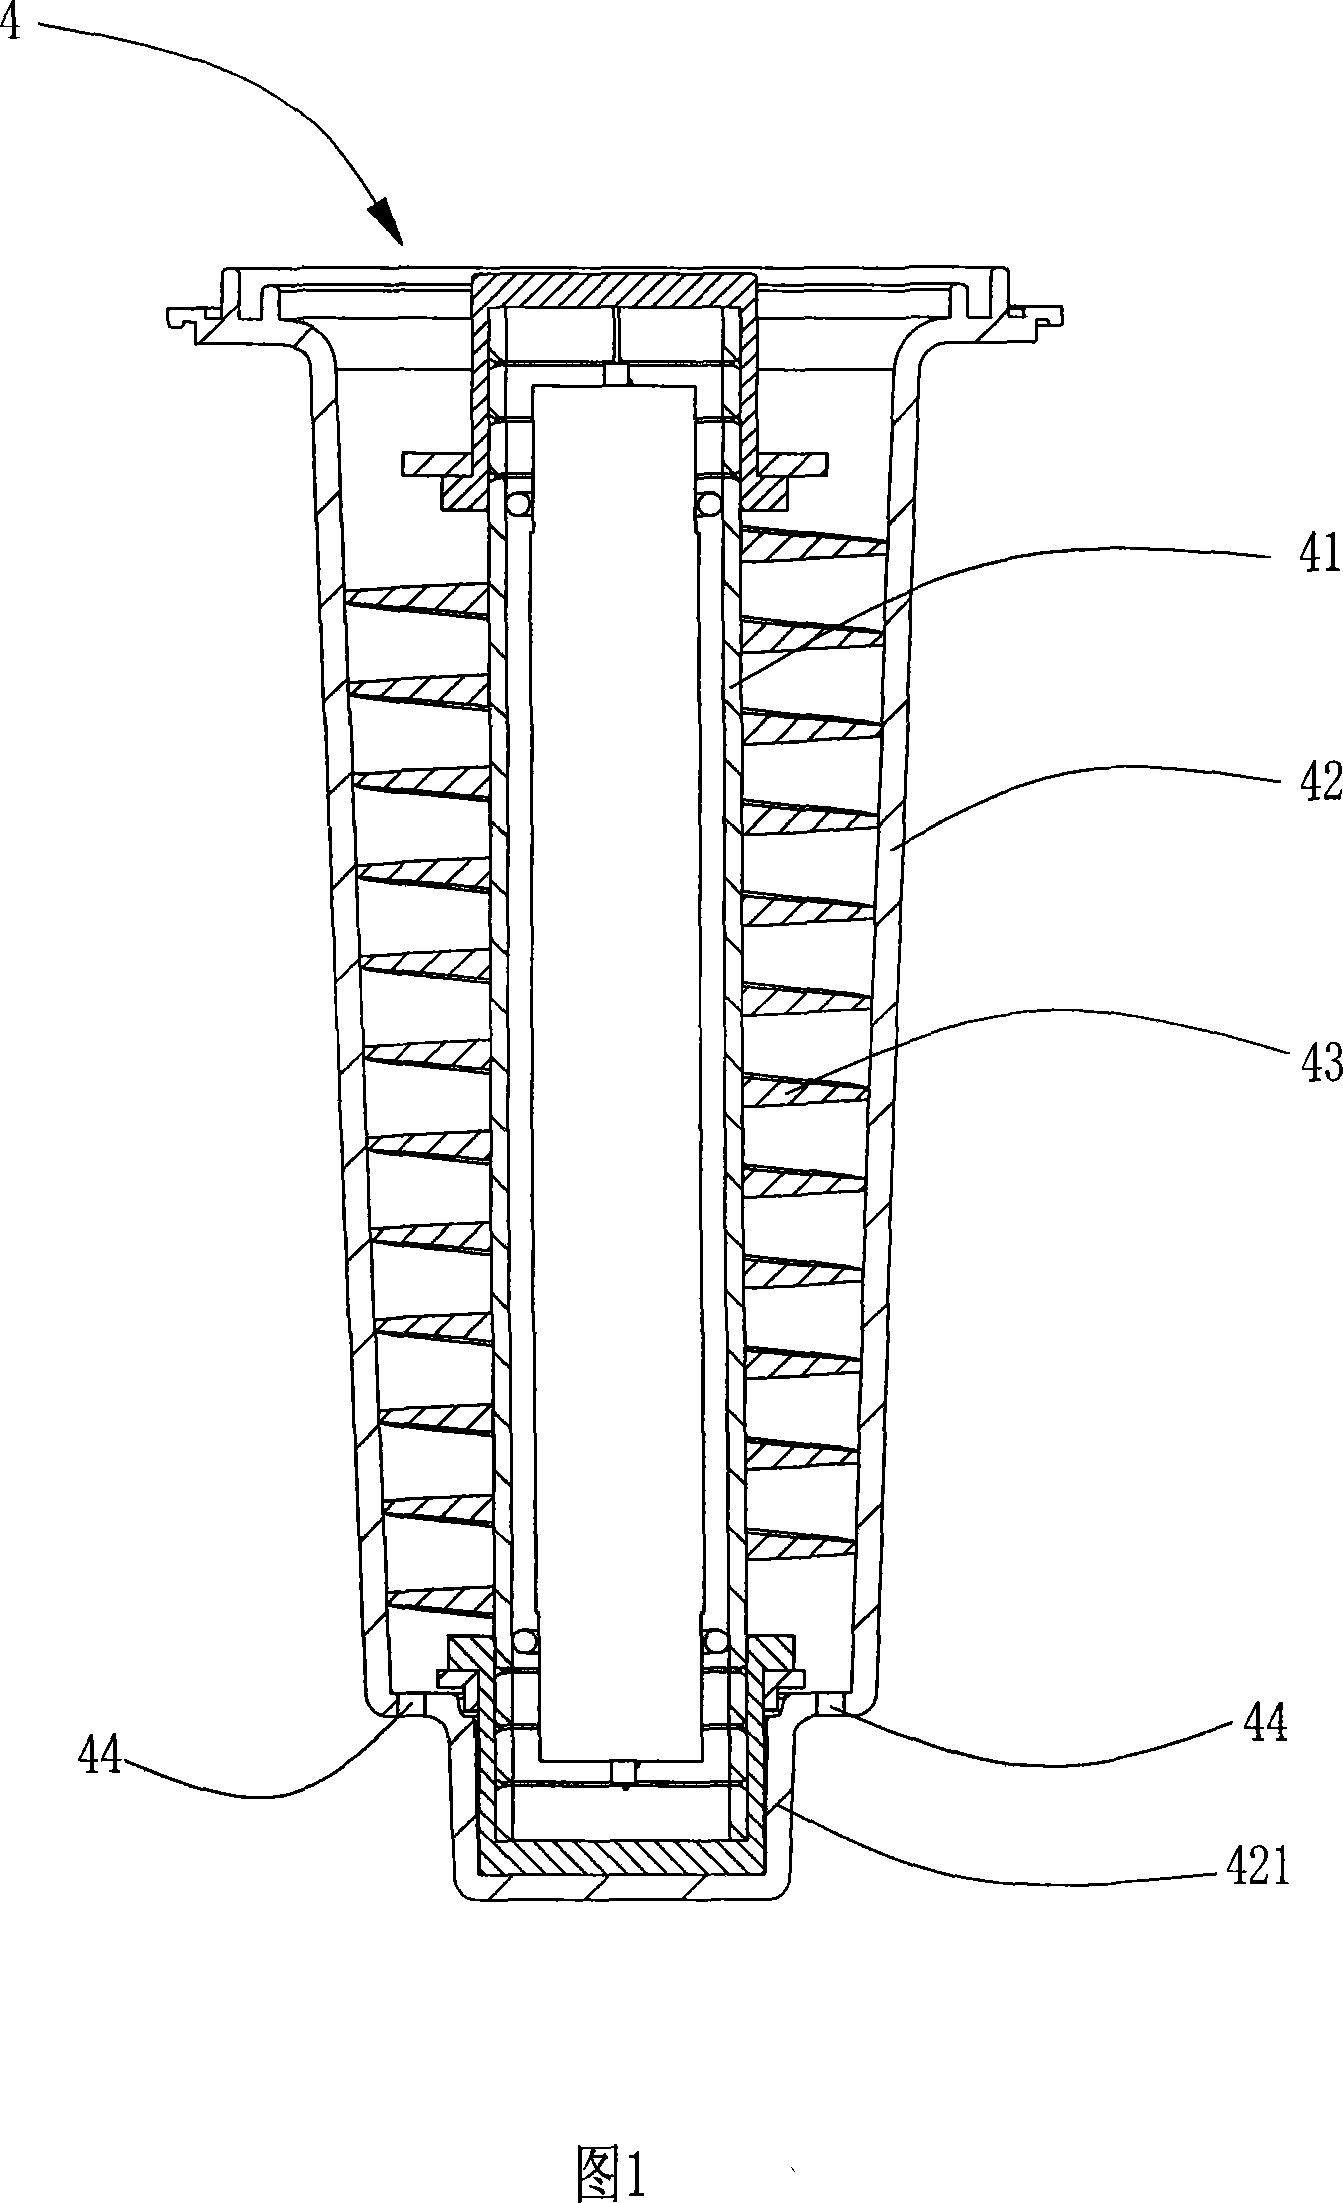 Ultraviolet ray sterilization equipment and device for treatment of water having the same